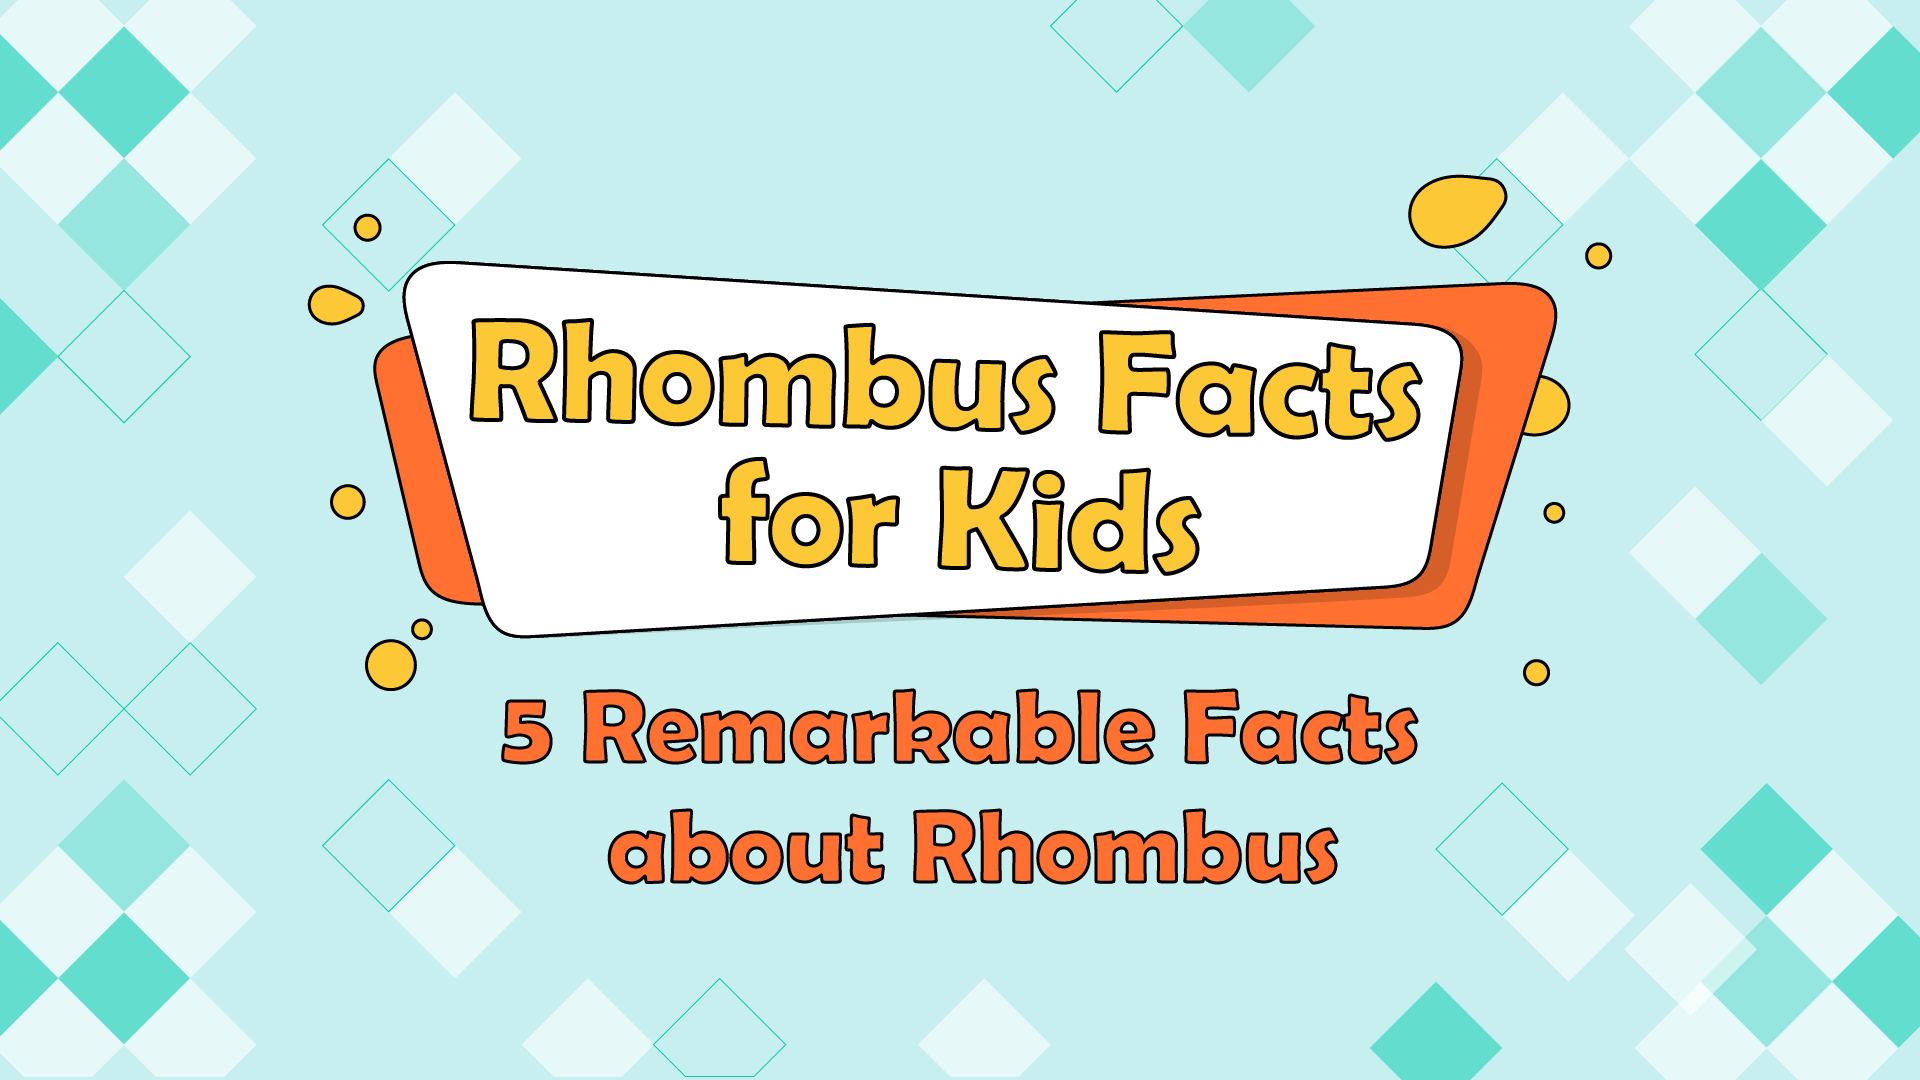 Rhombus Facts for Kids – 5 Remarkable Facts about Rhombus